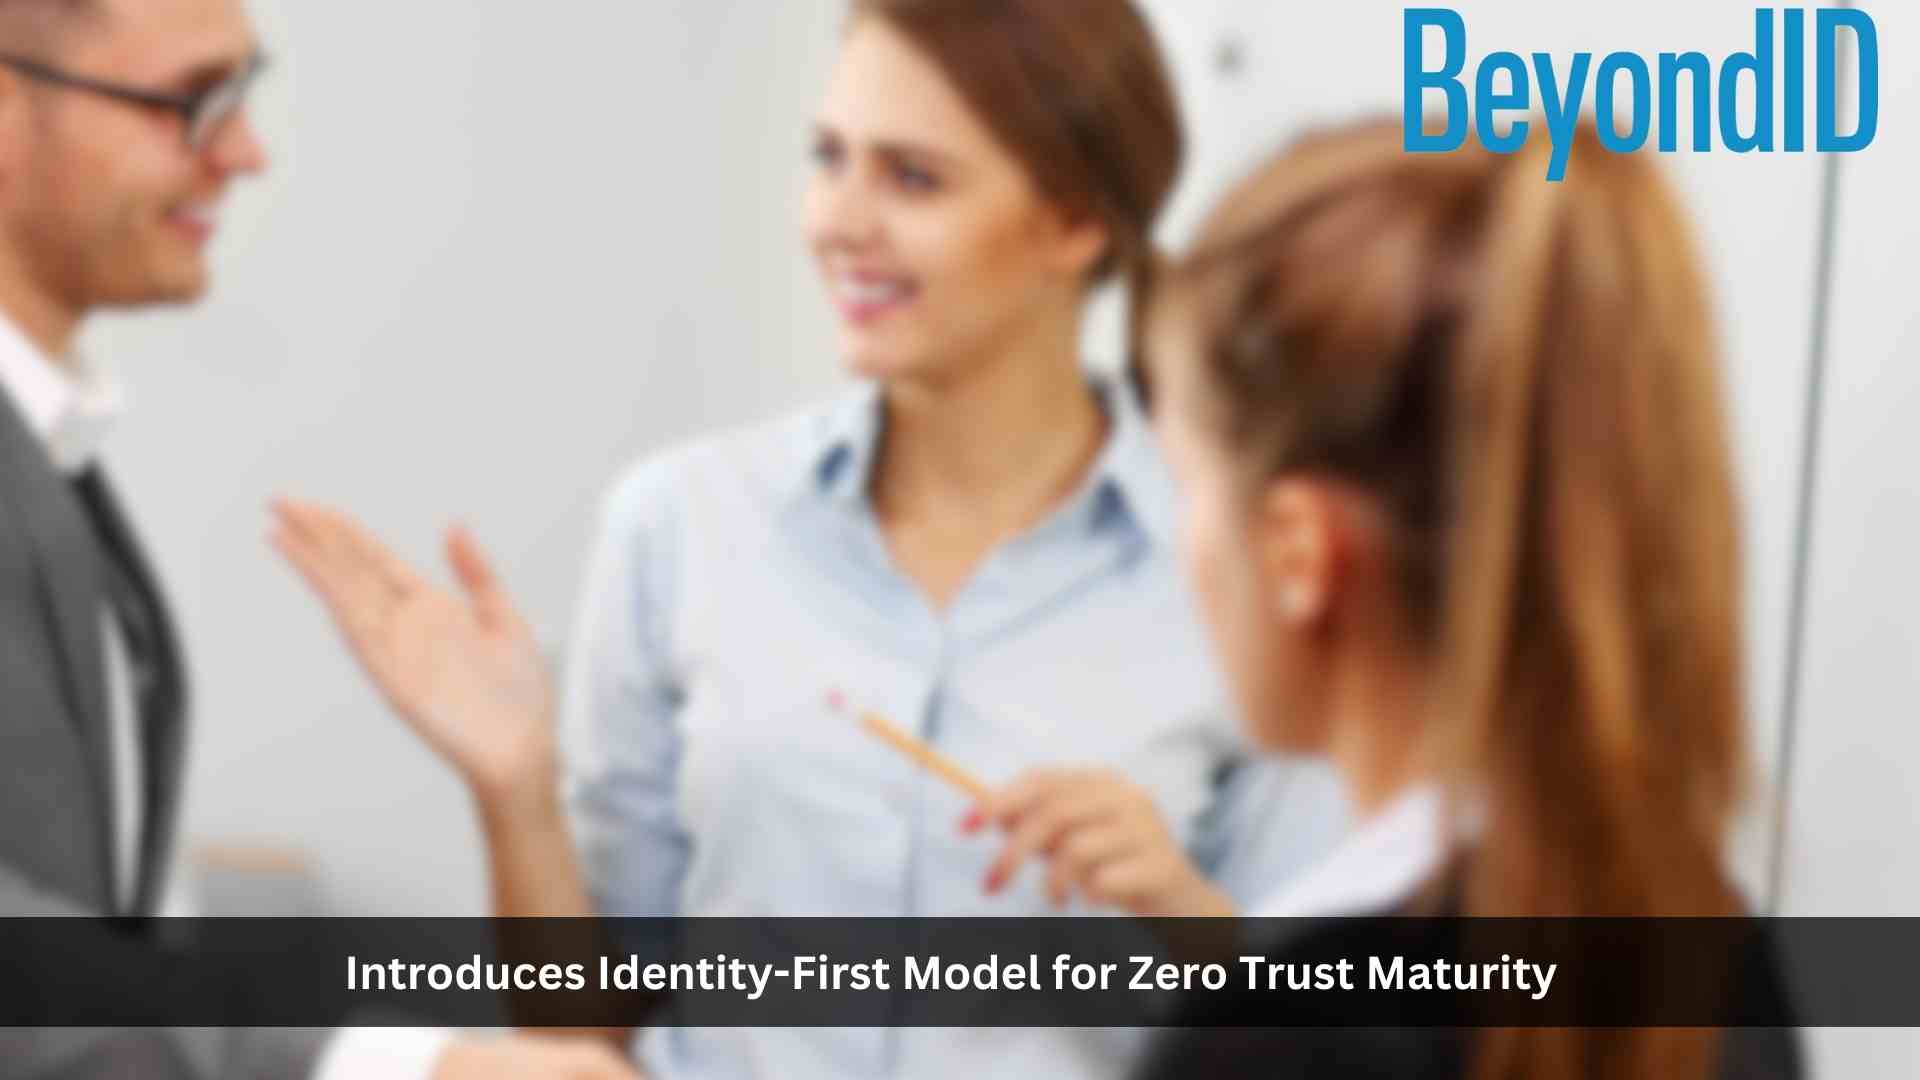 BeyondID Introduces Identity-First Model for Zero Trust Maturity